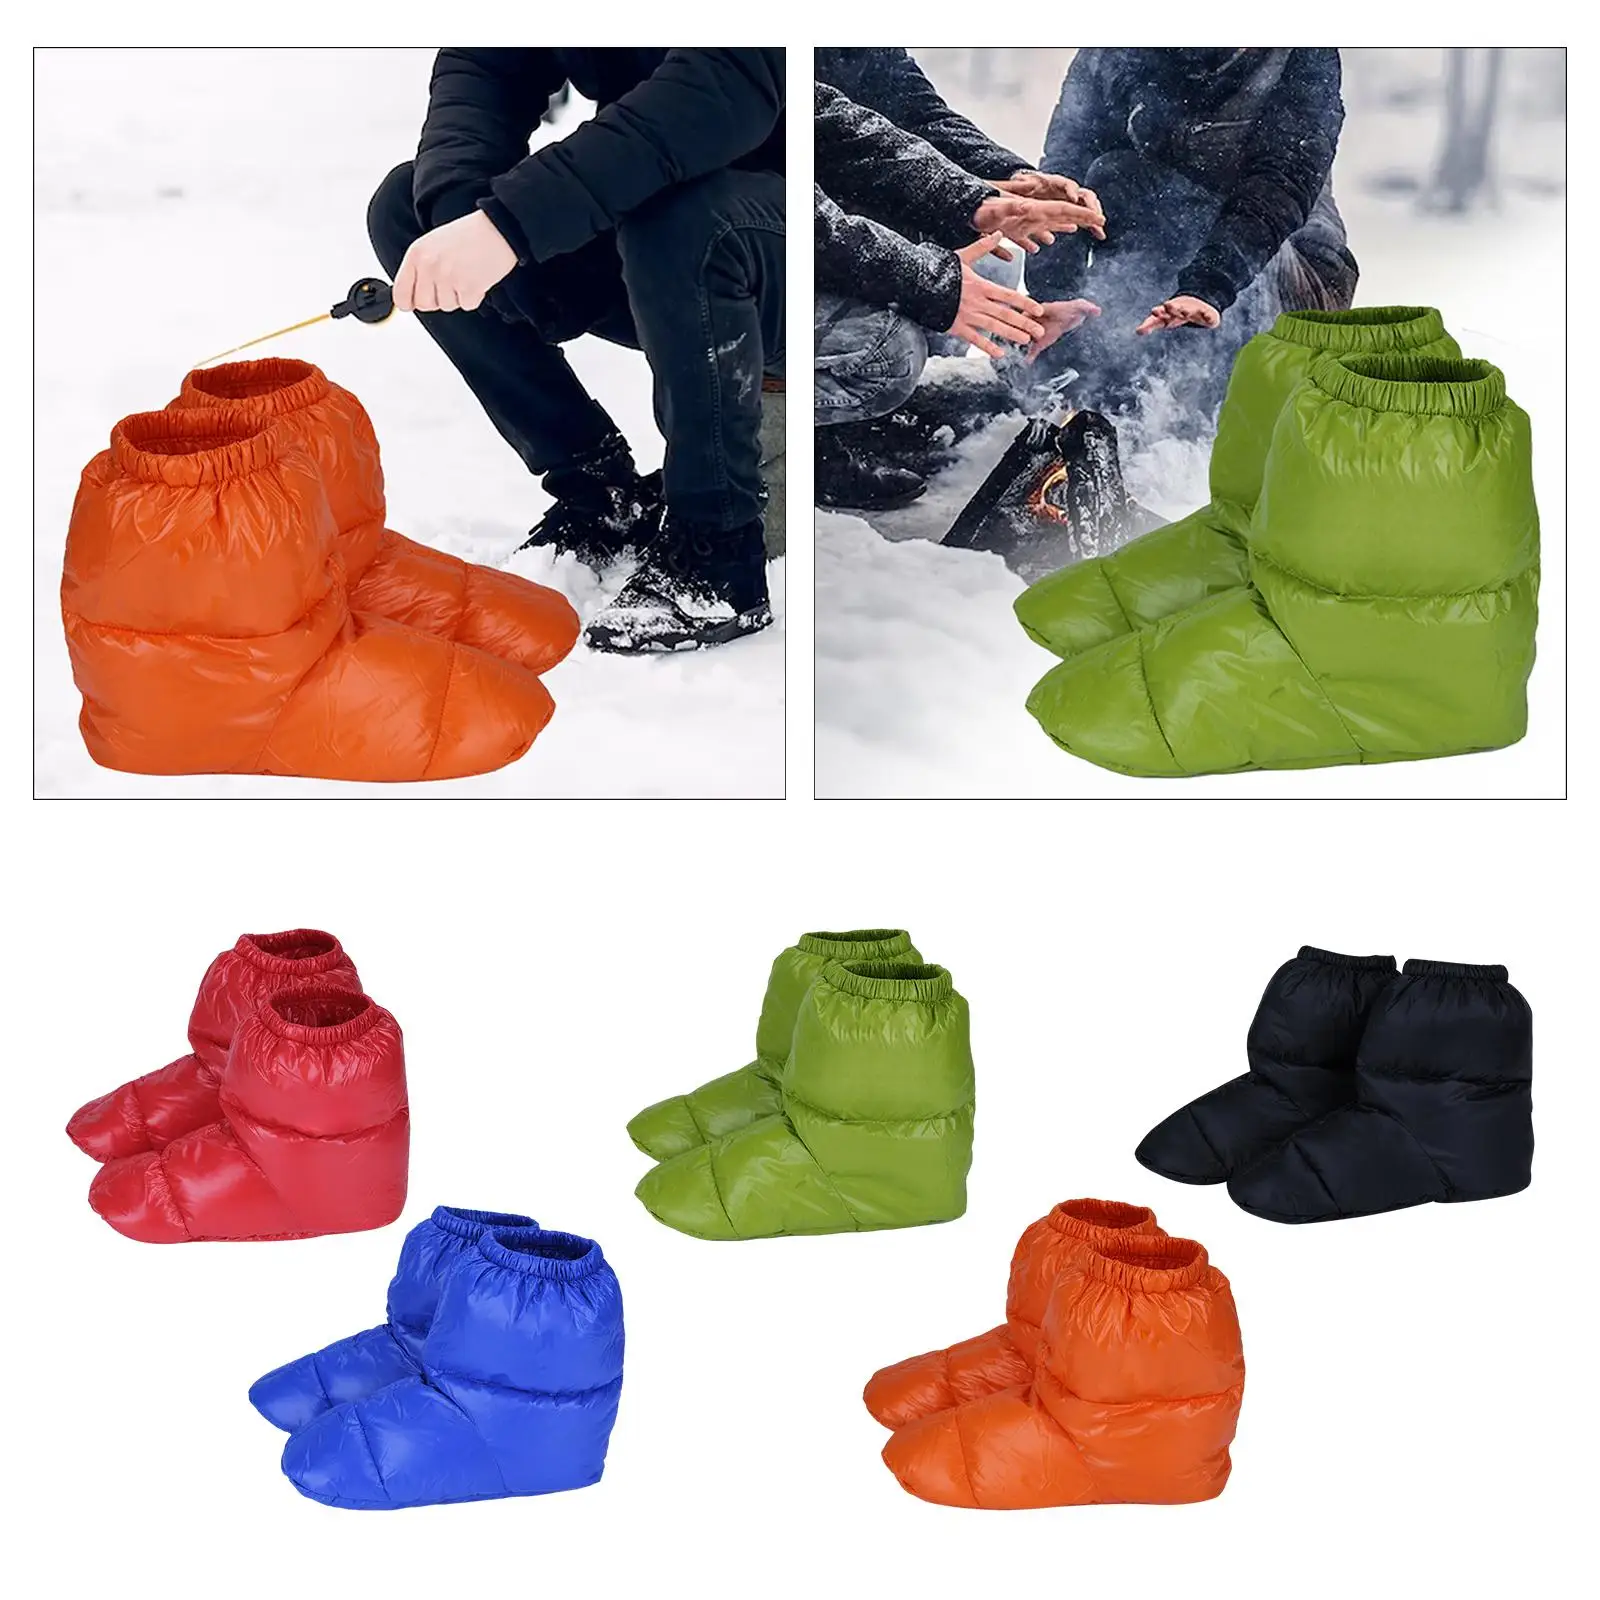 1 Pair Winter Down Slippers Bootie Shoes Camp Tent Women Men Feet Cover Socks Footwear for Fishing Bedroom Office Camping Hiking